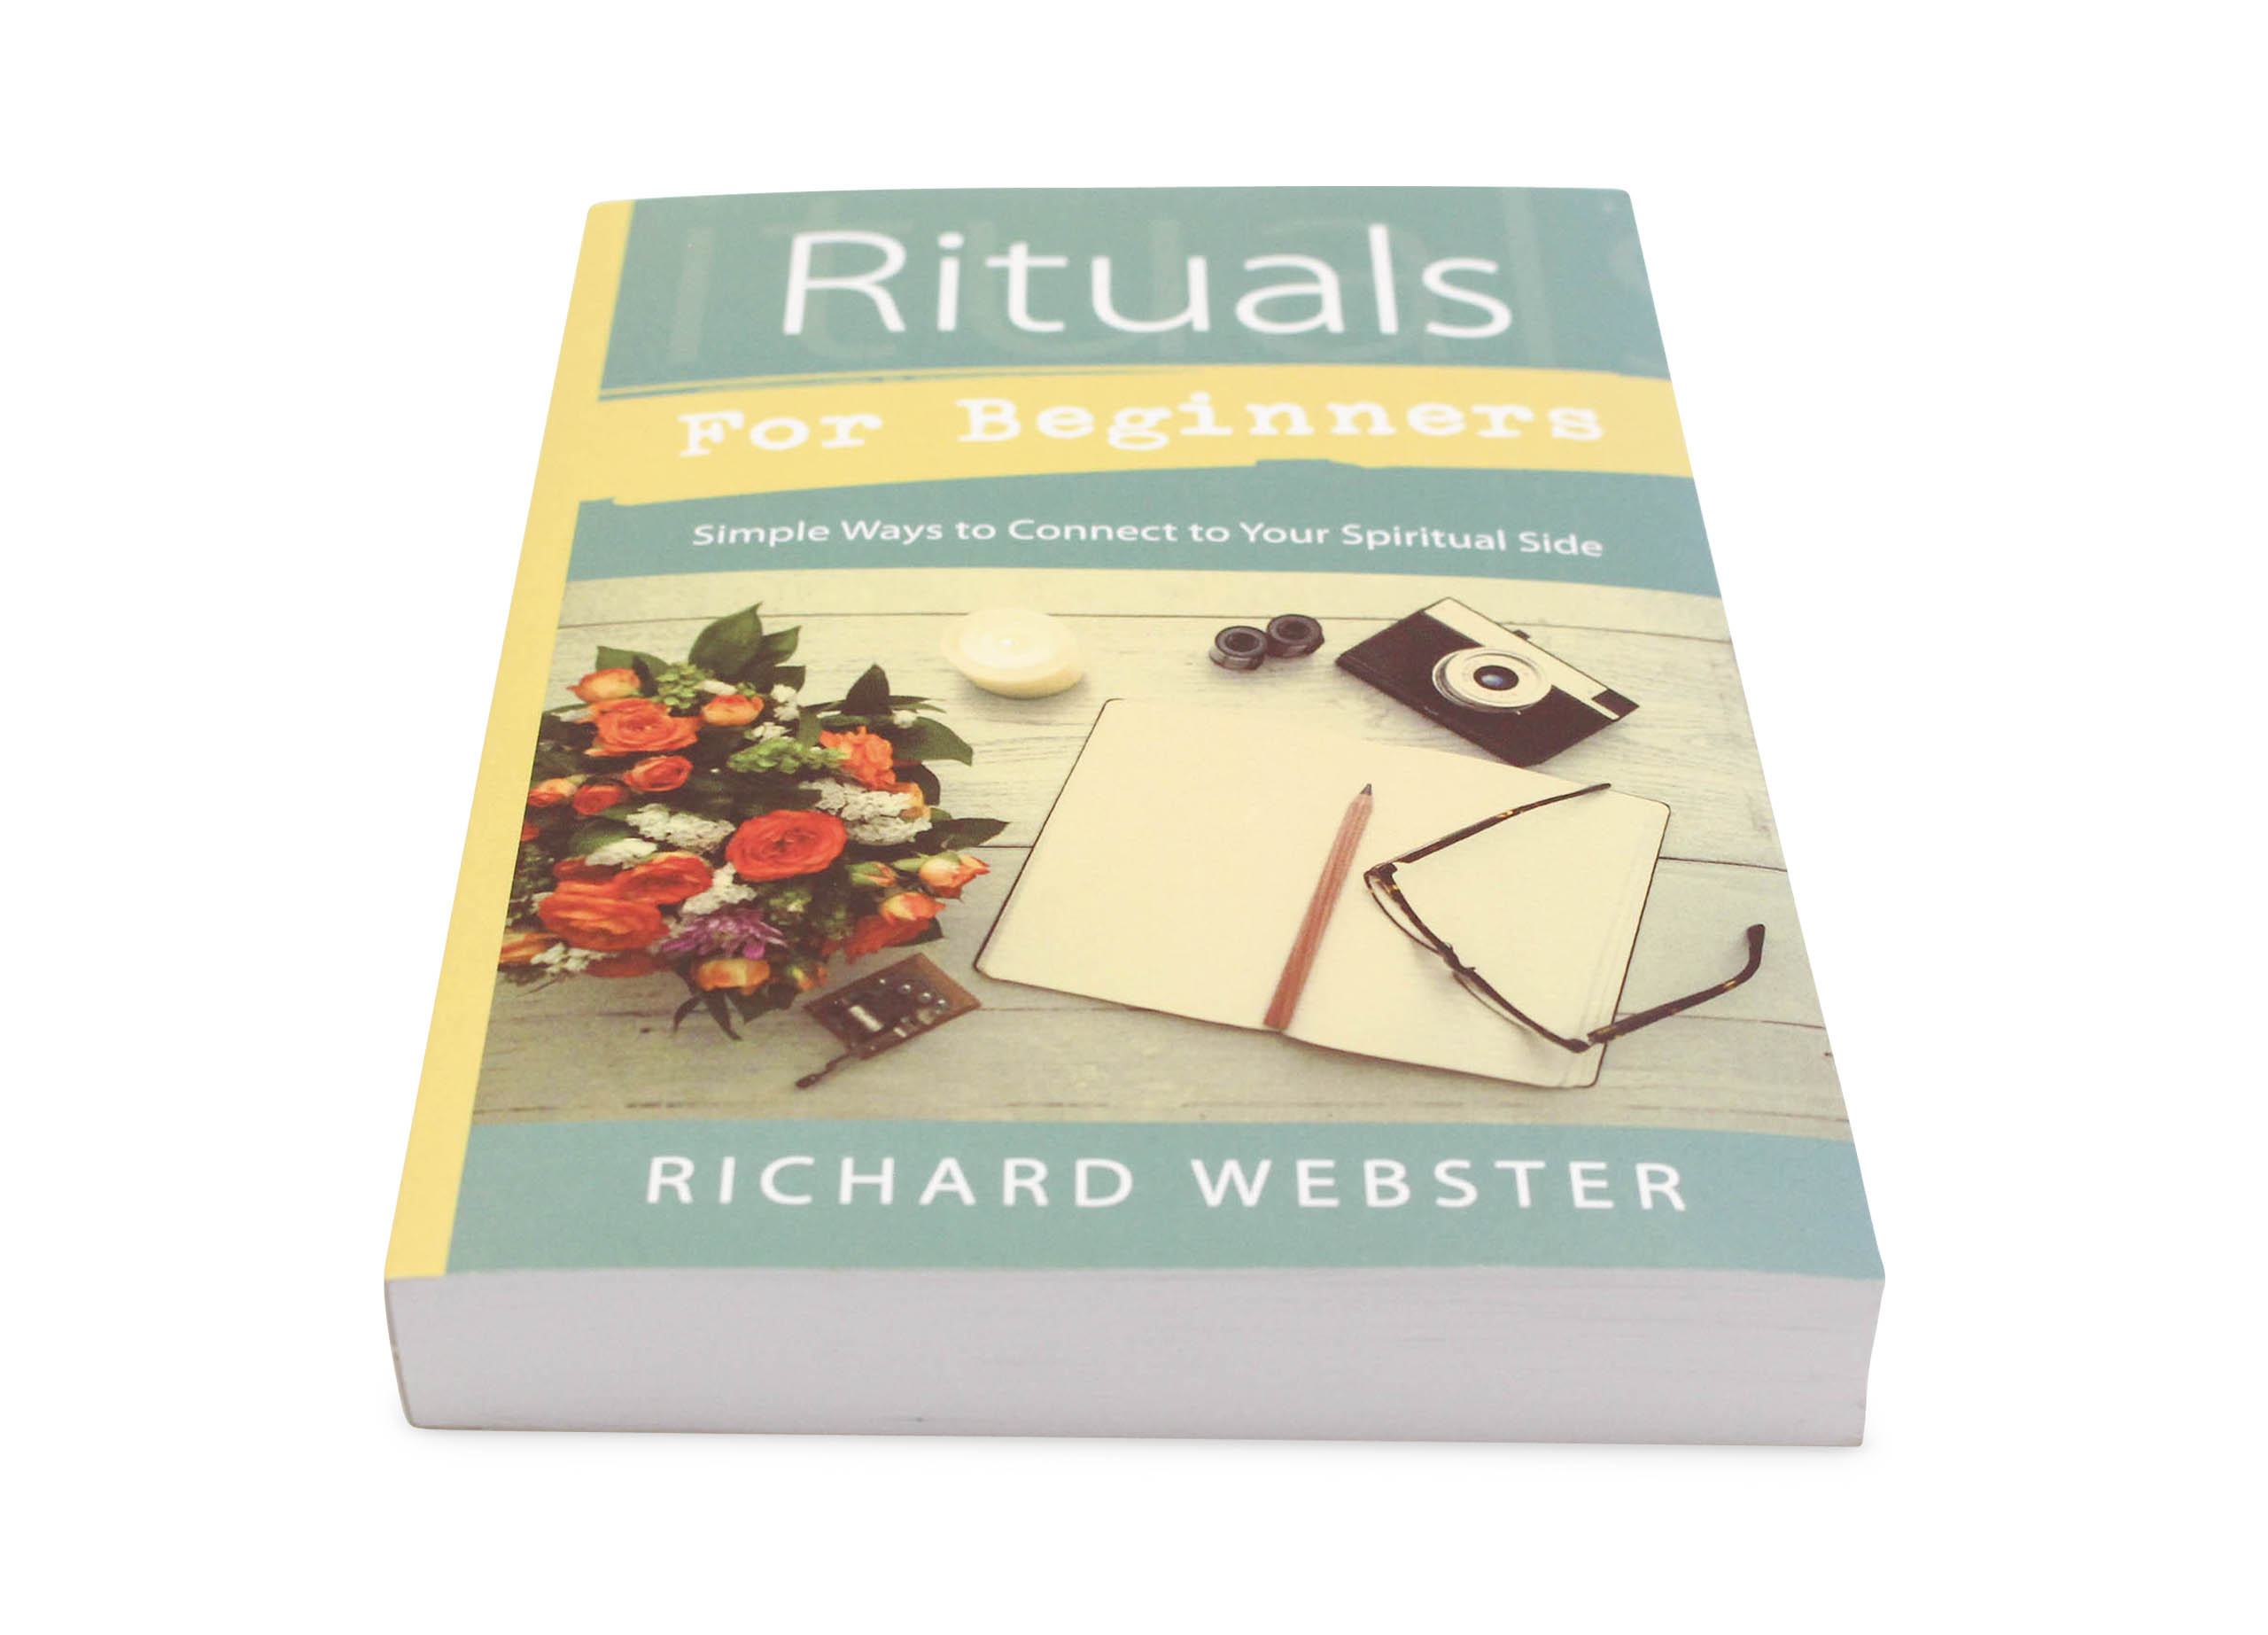 Rituals for Beginners - Crystal Dreams